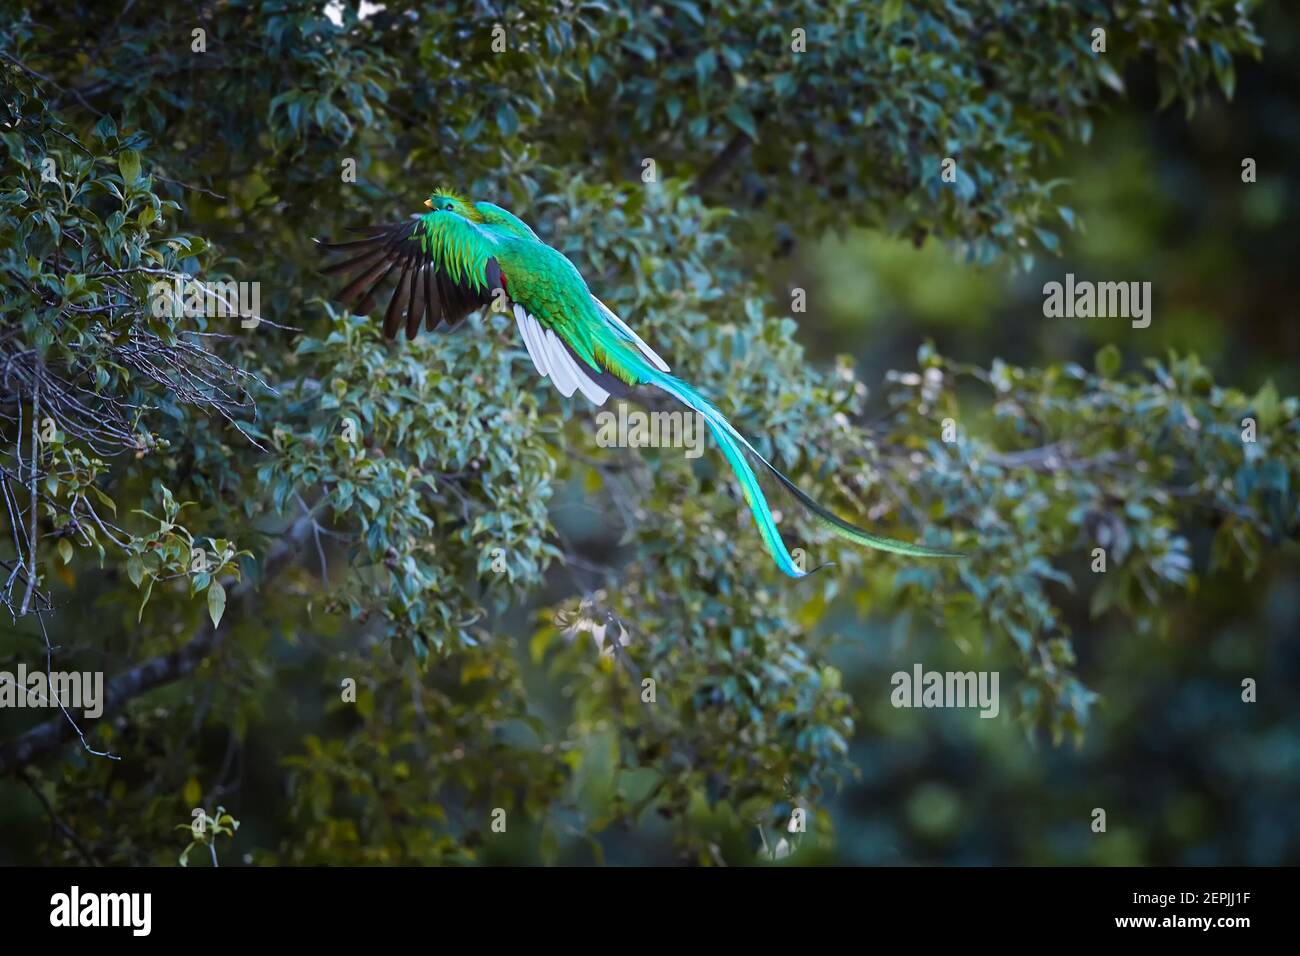 Flying Resplendent Quetzal, Pharomachrus mocinno, long-tailed, iridescent tropical bird feeding on wild avocado fruits. Rare view on male flying with Stock Photo